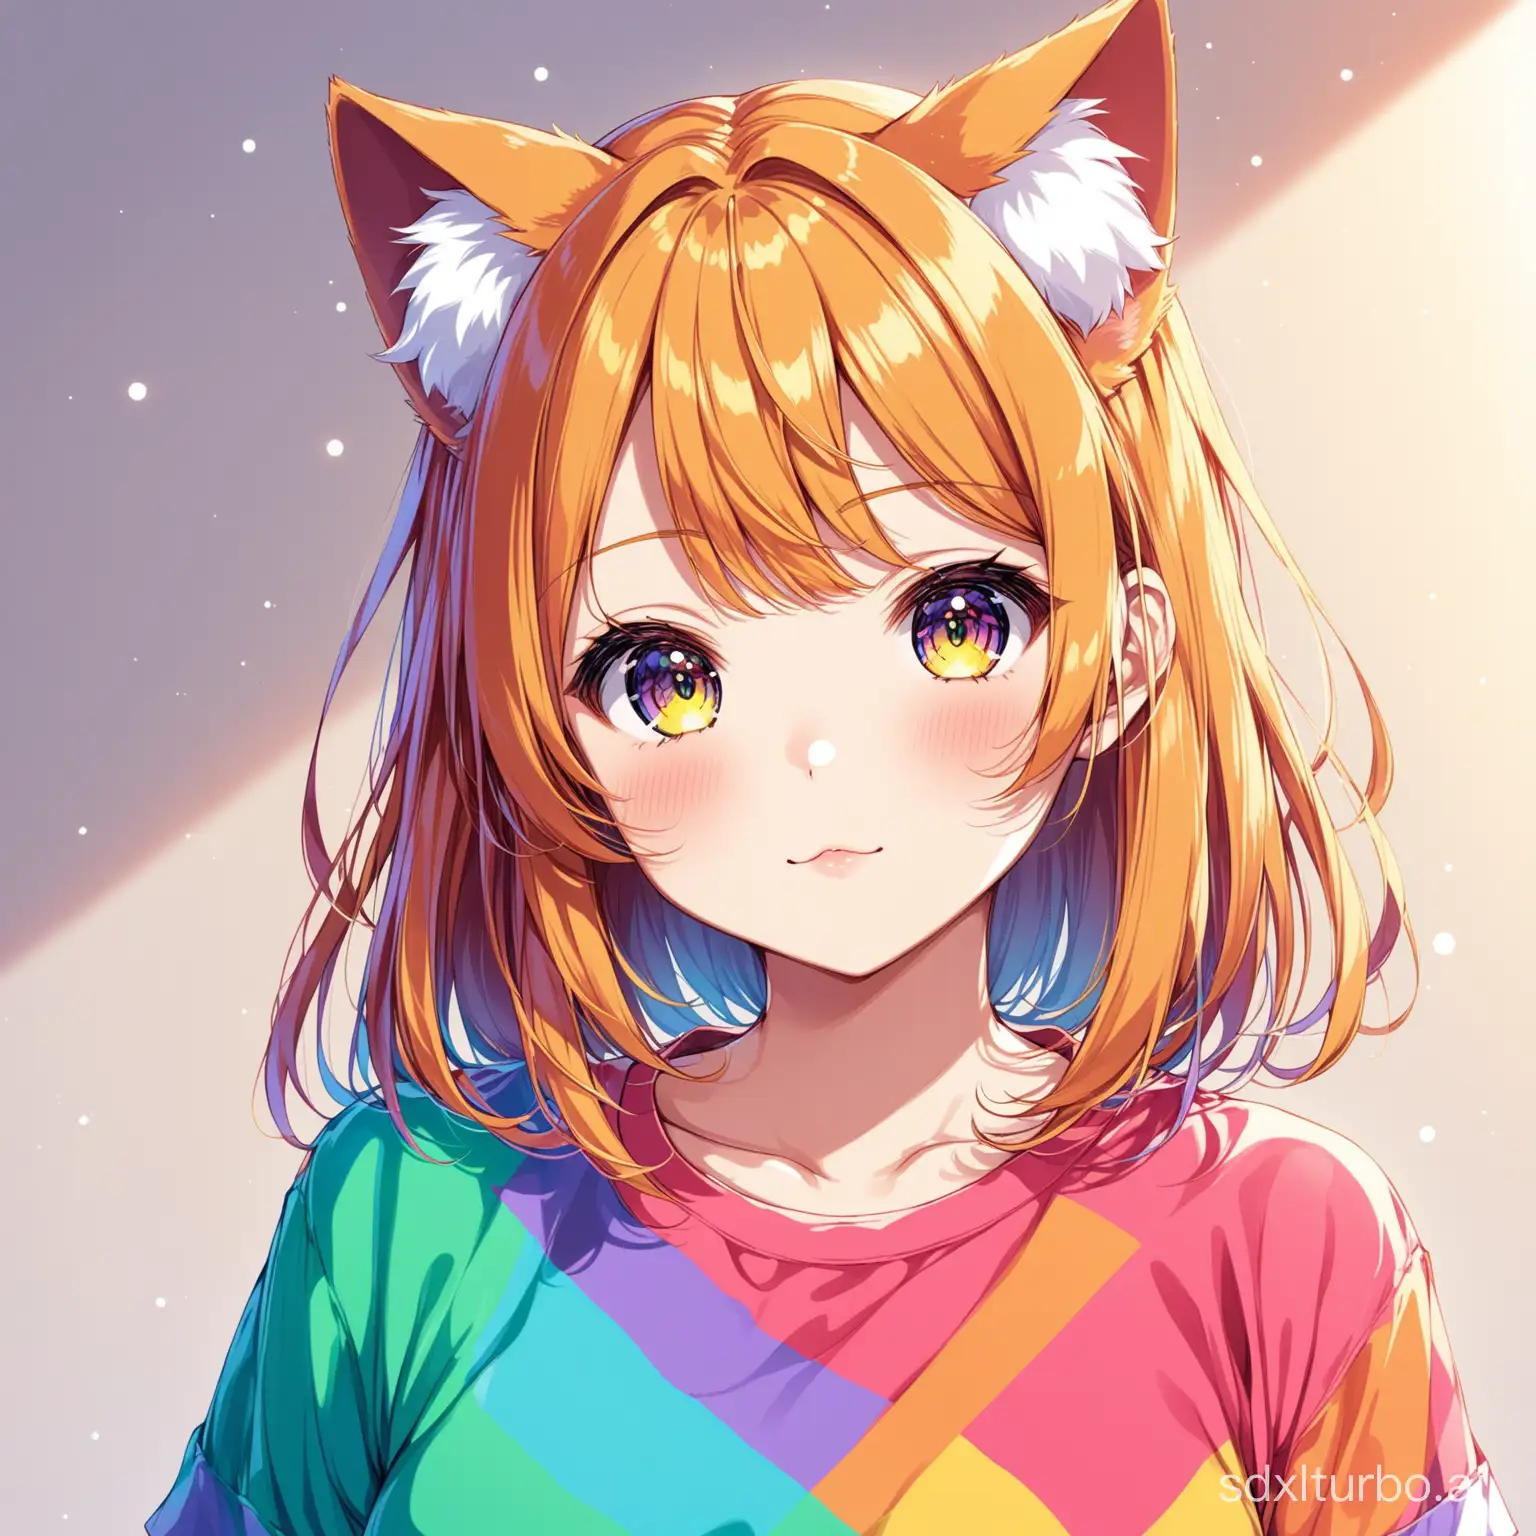 Colorful-Anime-Girl-with-Cat-Ears-in-Vibrant-Attire